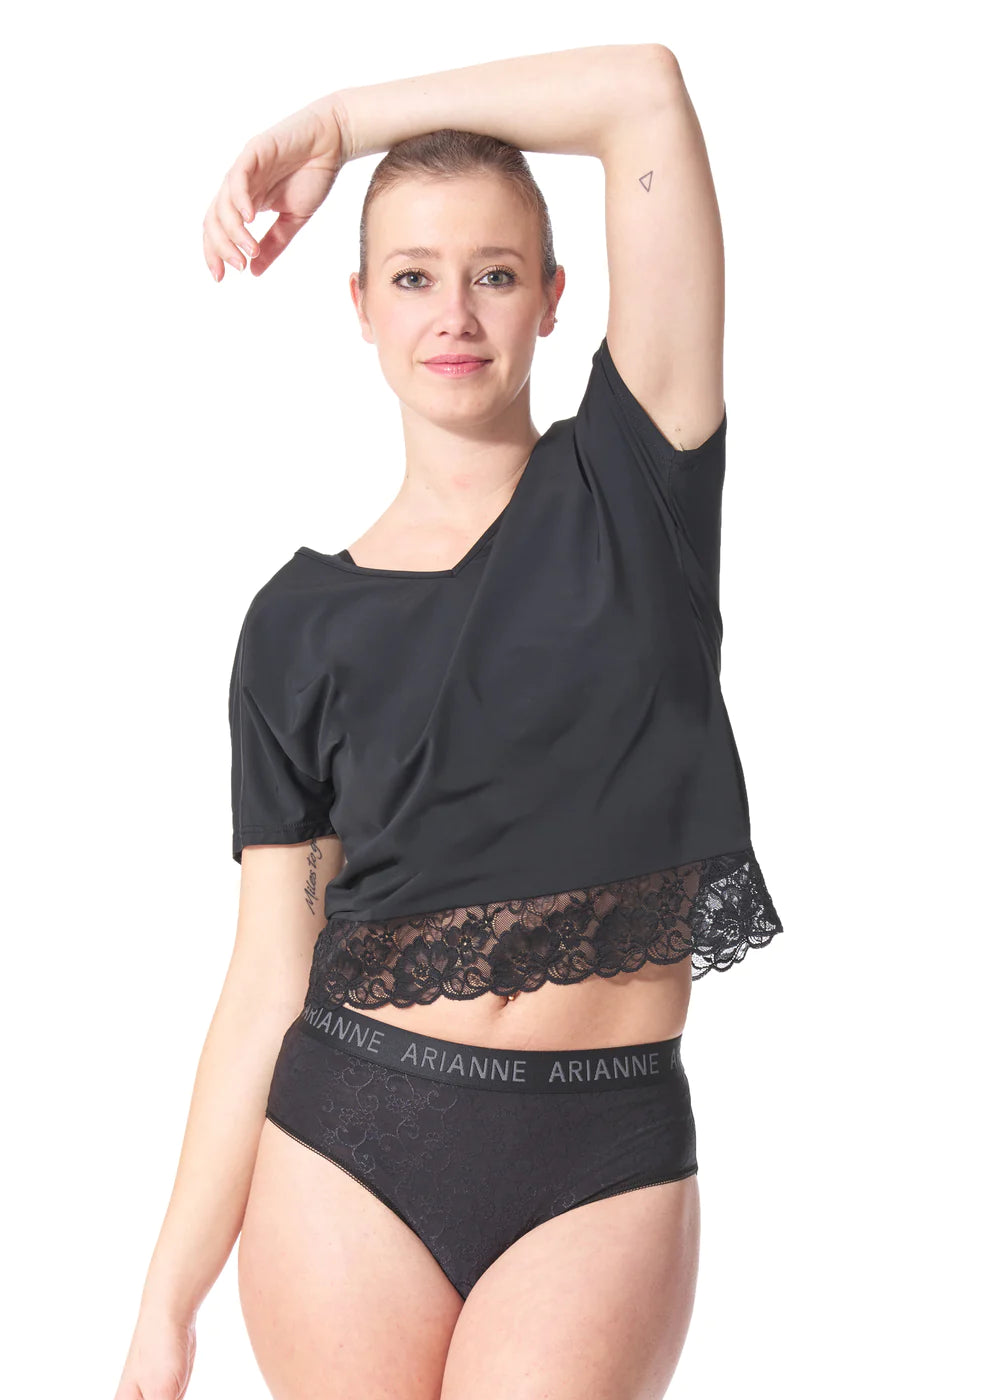 ARIANNE ELLE TOP WITH LACE DETAIL